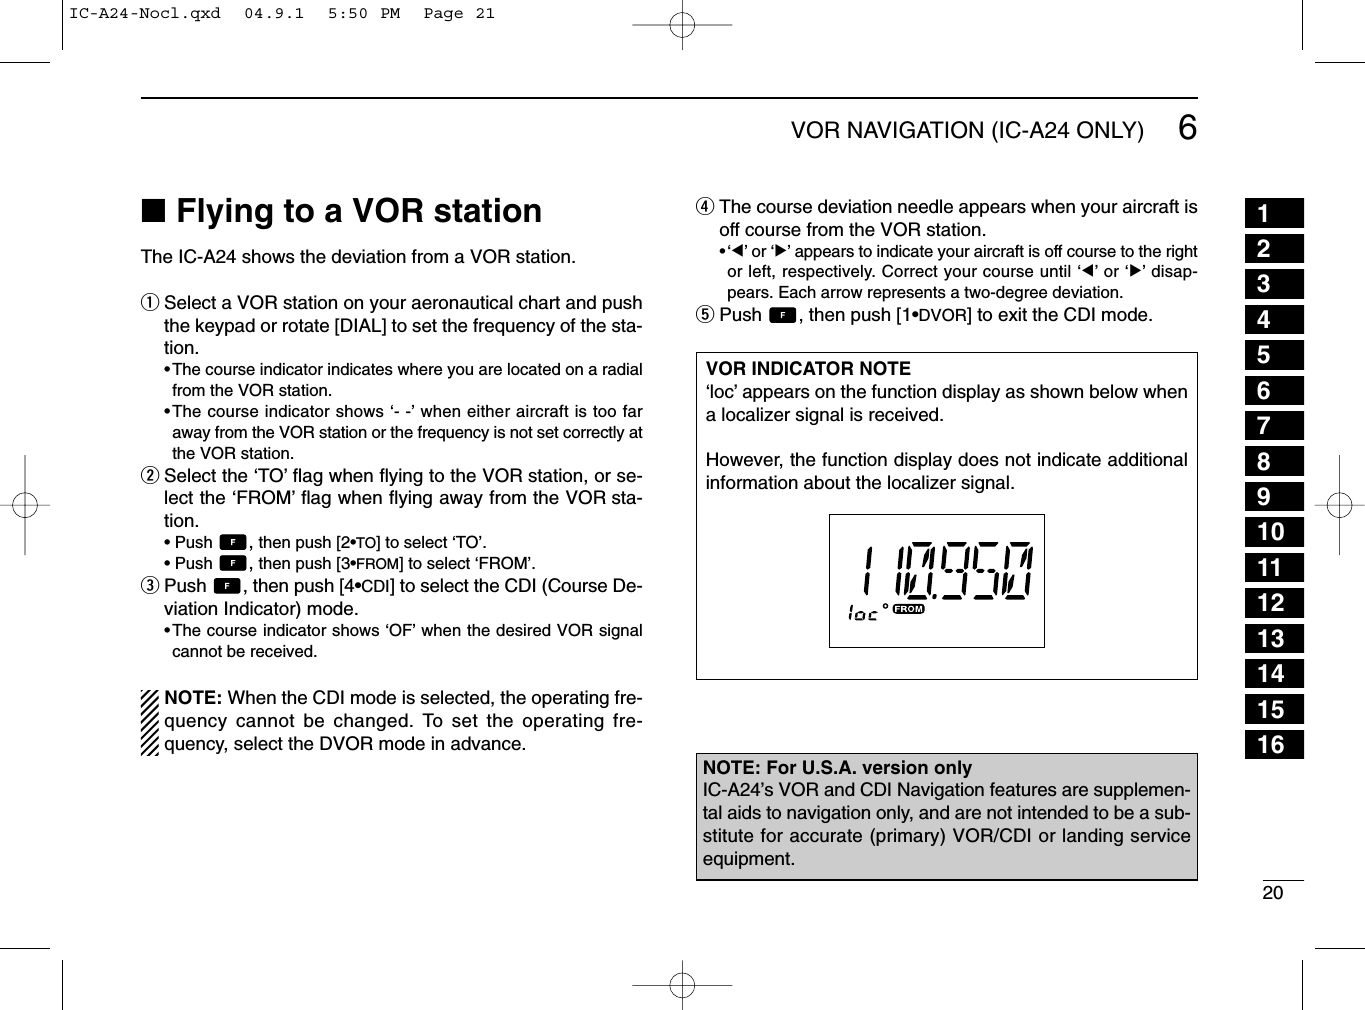 206VOR NAVIGATION (IC-A24 ONLY)■Flying to a VOR stationThe IC-A24 shows the deviation from a VOR station.qSelect a VOR station on your aeronautical chart and pushthe keypad or rotate [DIAL] to set the frequency of the sta-tion.•The course indicator indicates where you are located on a radialfrom the VOR station.•The course indicator shows ‘- -’when either aircraft is too faraway from the VOR station or the frequency is not set correctly atthe VOR station.wSelect the ‘TO’ﬂag when ﬂying to the VOR station, or se-lect the ‘FROM’ﬂag when ﬂying away from the VOR sta-tion.• Push  ,then push [2•TO] to select ‘TO’.• Push  ,then push [3•FROM] to select ‘FROM’.ePush  , then push [4•CDI] to select the CDI (Course De-viation Indicator) mode.•The course indicator shows ‘OF’when the desired VOR signalcannot be received.NOTE: When the CDI mode is selected, the operating fre-quency cannot be changed. To set the operating fre-quency, select the DVOR mode in advance.rThe course deviation needle appears when your aircraft isoff course from the VOR station.•‘Ω’or ‘≈’appears to indicate your aircraft is off course to the rightor left, respectively. Correct your course until ‘Ω’or ‘≈’disap-pears. Each arrow represents a two-degree deviation.tPush  , then push [1•DVOR] to exit the CDI mode.VOR INDICATOR NOTE‘loc’appears on the function display as shown below whena localizer signal is received.However, the function display does not indicate additionalinformation about the localizer signal.NOTE: For U.S.A. version onlyIC-A24’s VOR and CDI Navigation features are supplemen-tal aids to navigation only, and are not intended to be a sub-stitute for accurate (primary) VOR/CDI or landing serviceequipment.12345678910111213141516IC-A24-Nocl.qxd  04.9.1  5:50 PM  Page 21